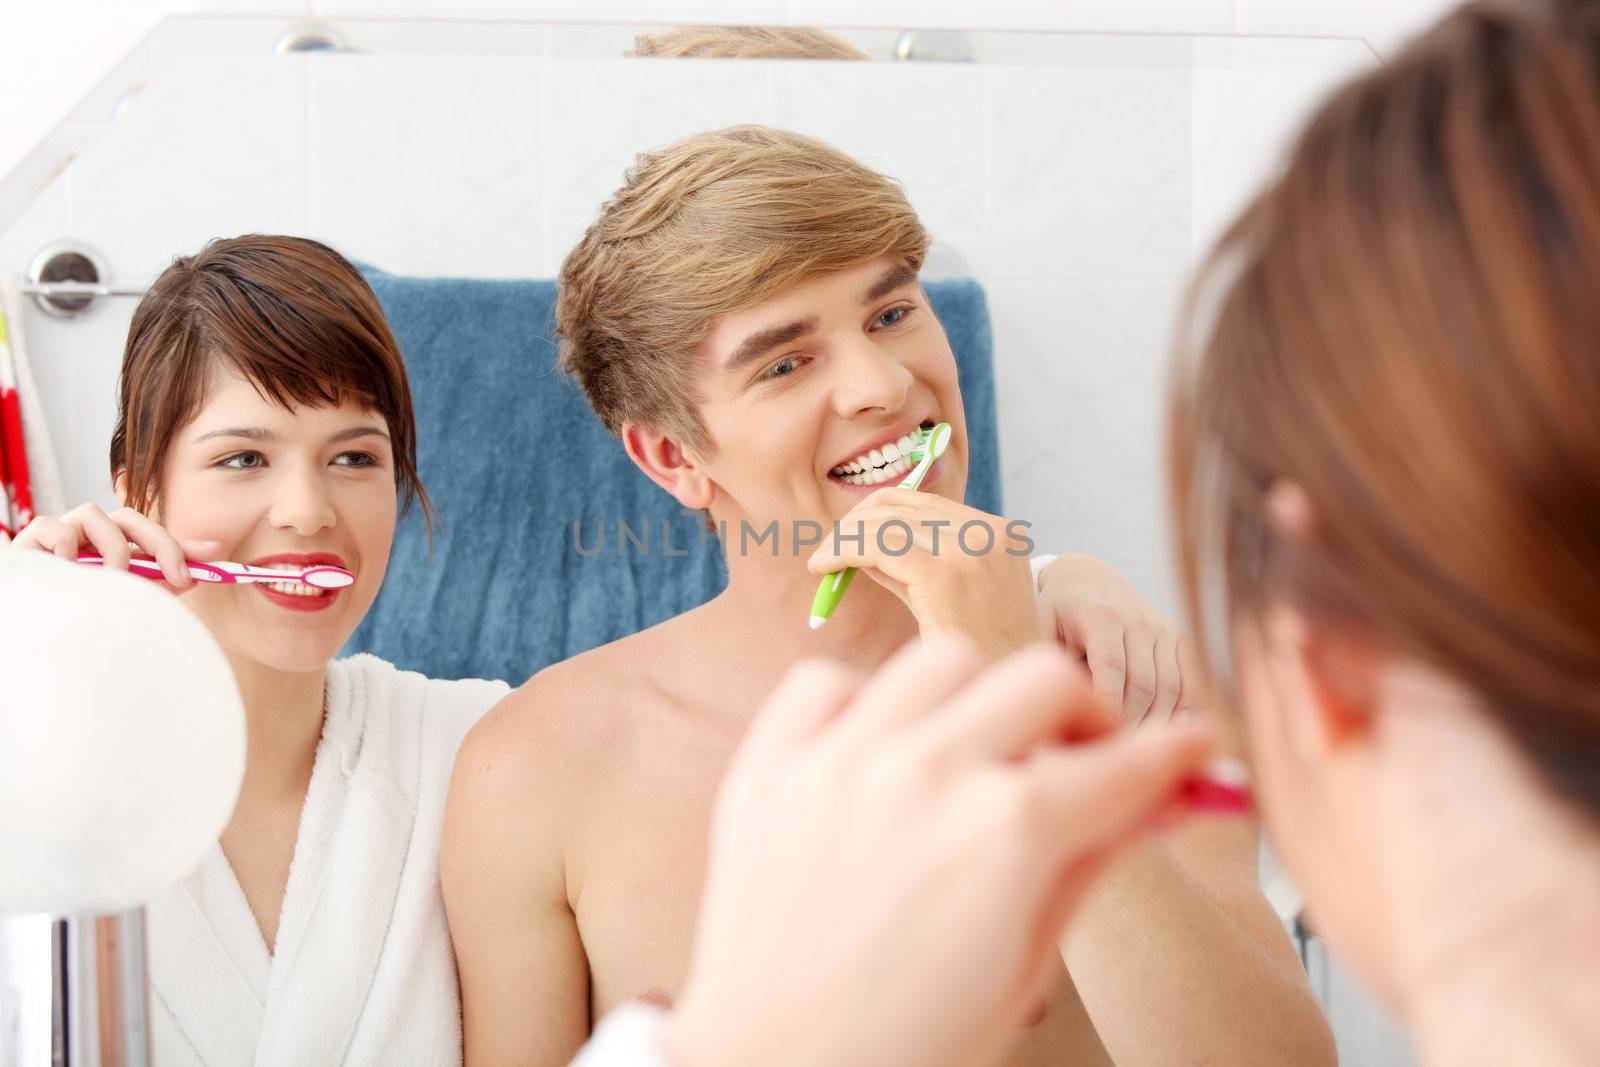 Young couple cleaning teeth together at bathroom. Focus on man.